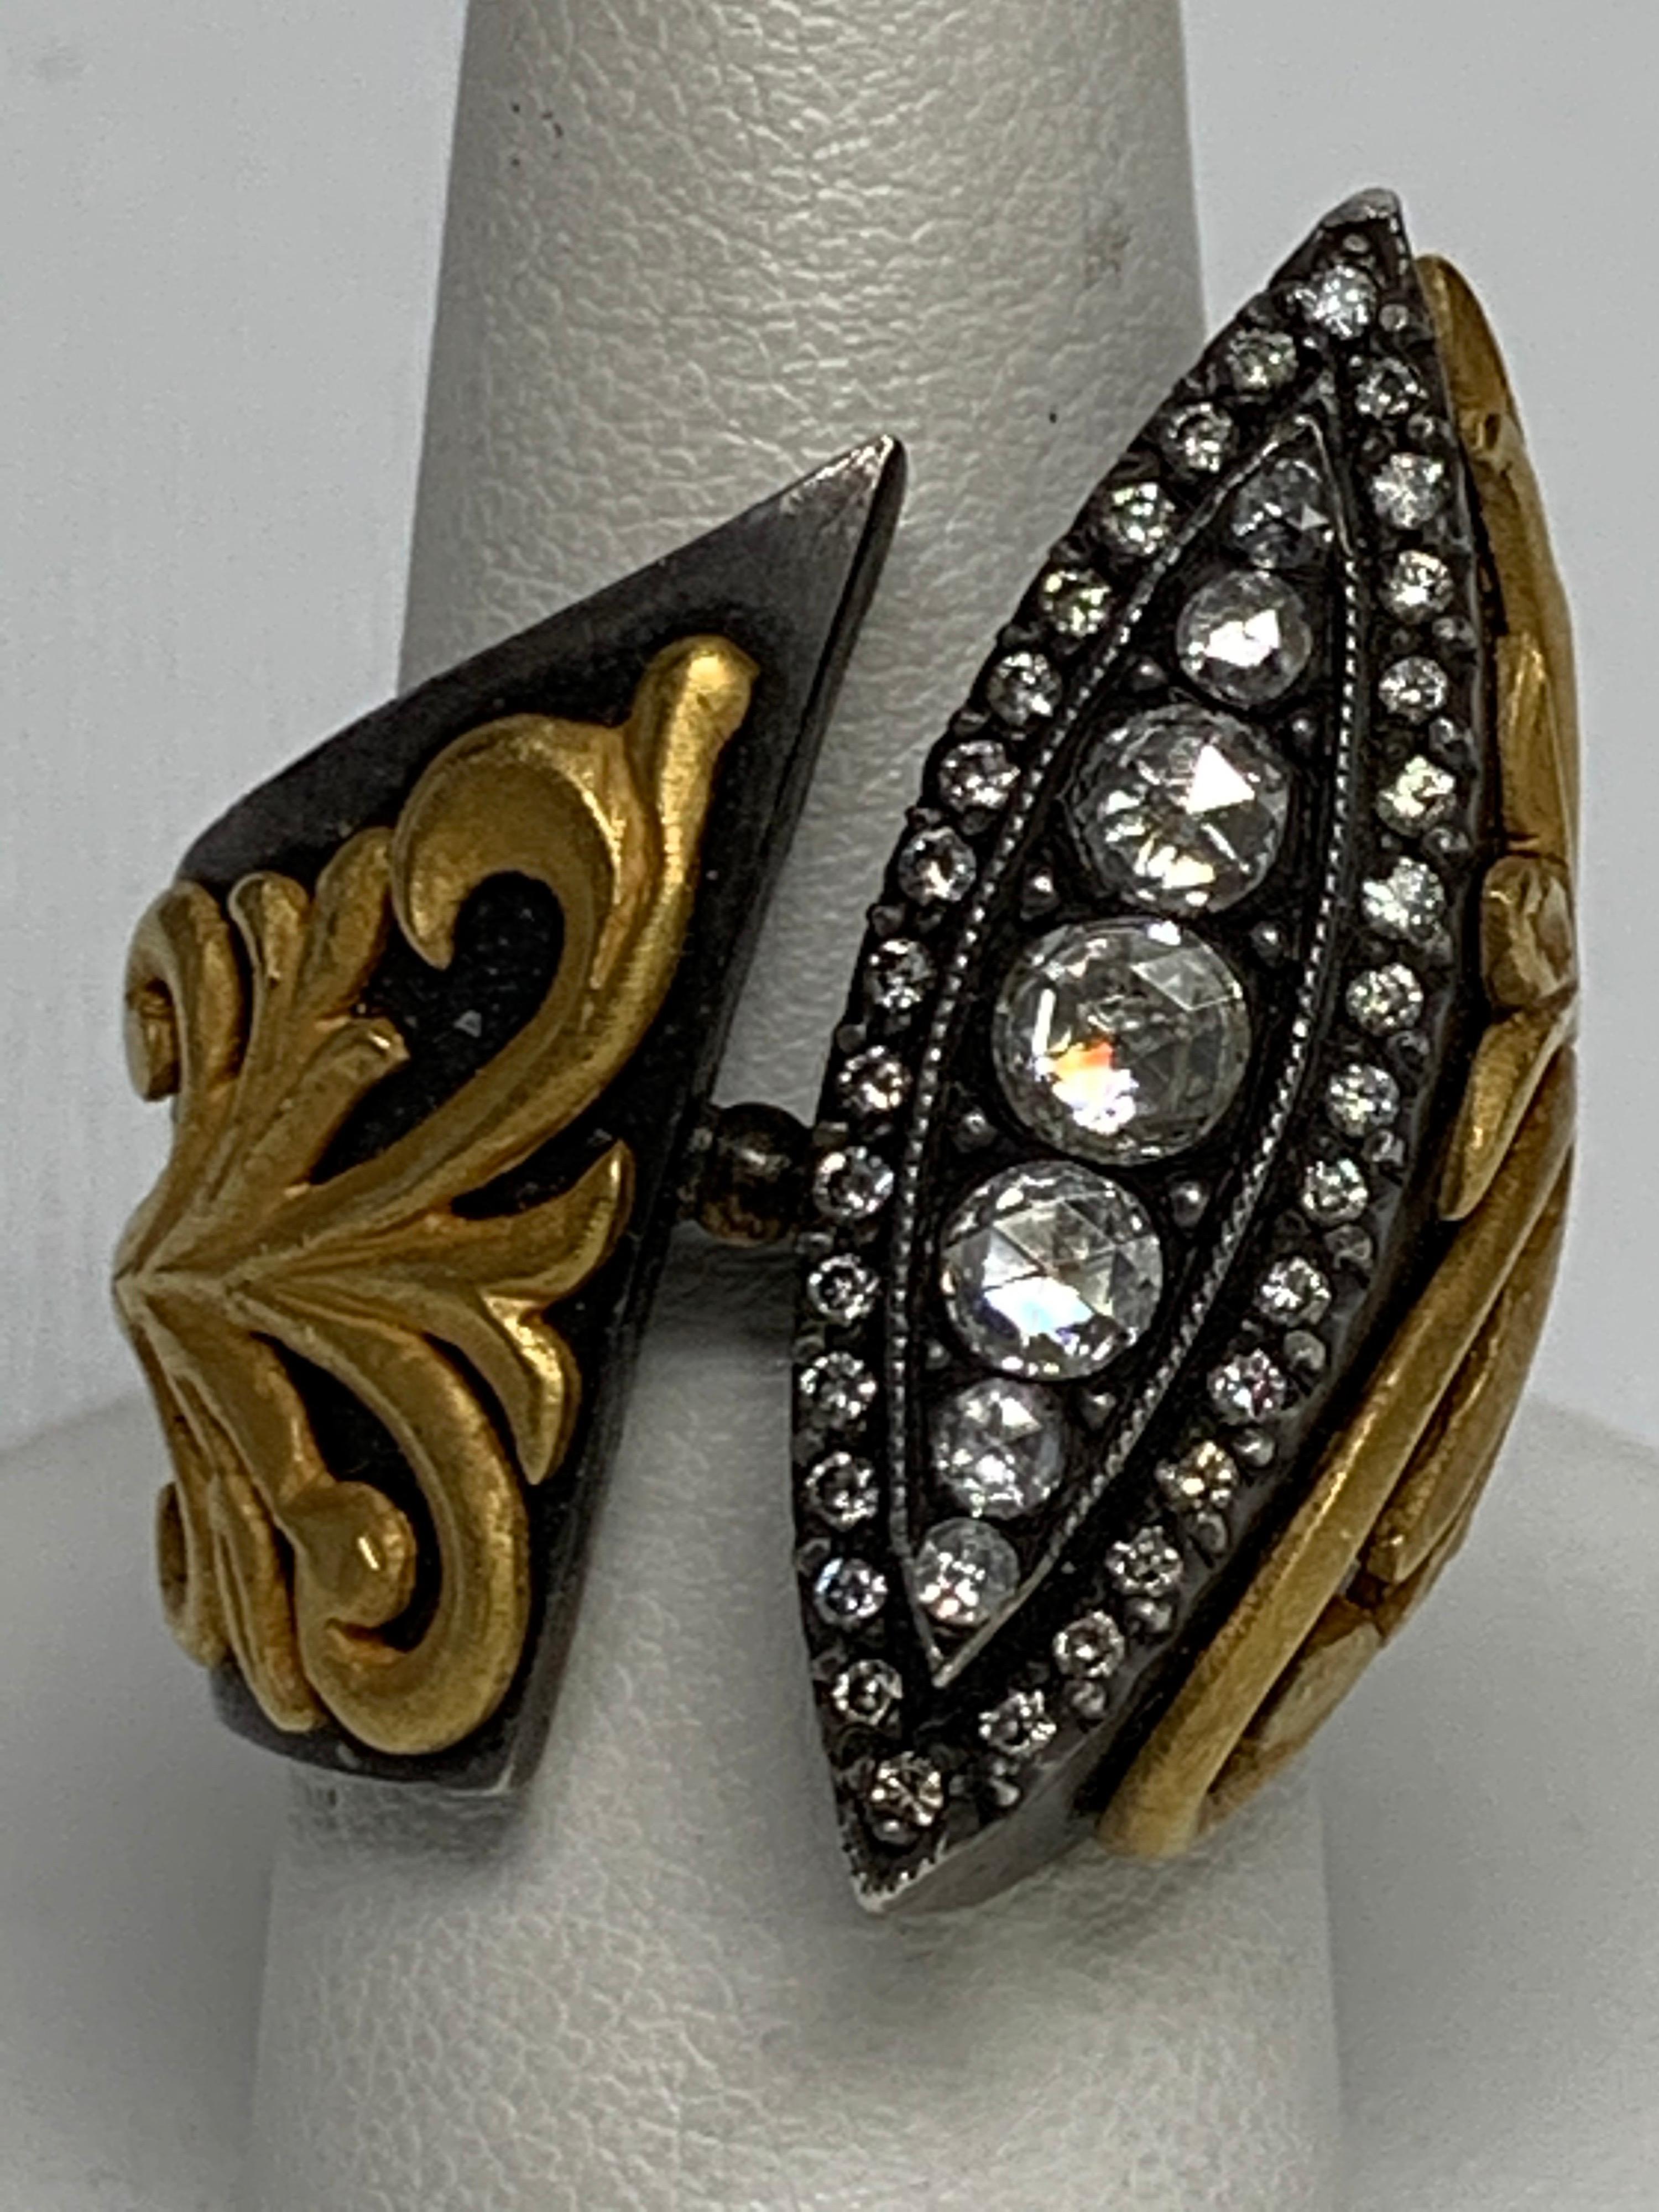 Round Cut White Diamond, Oxidized Silver & Yellow Gold Ring.  

Featuring a Round Cut White Diamond Ring with a total weight of 2.75 carats, set in Oxidized Silver & Yellow Gold.  Size, 7

This one-of-a-kind ring was created by hand is certified,